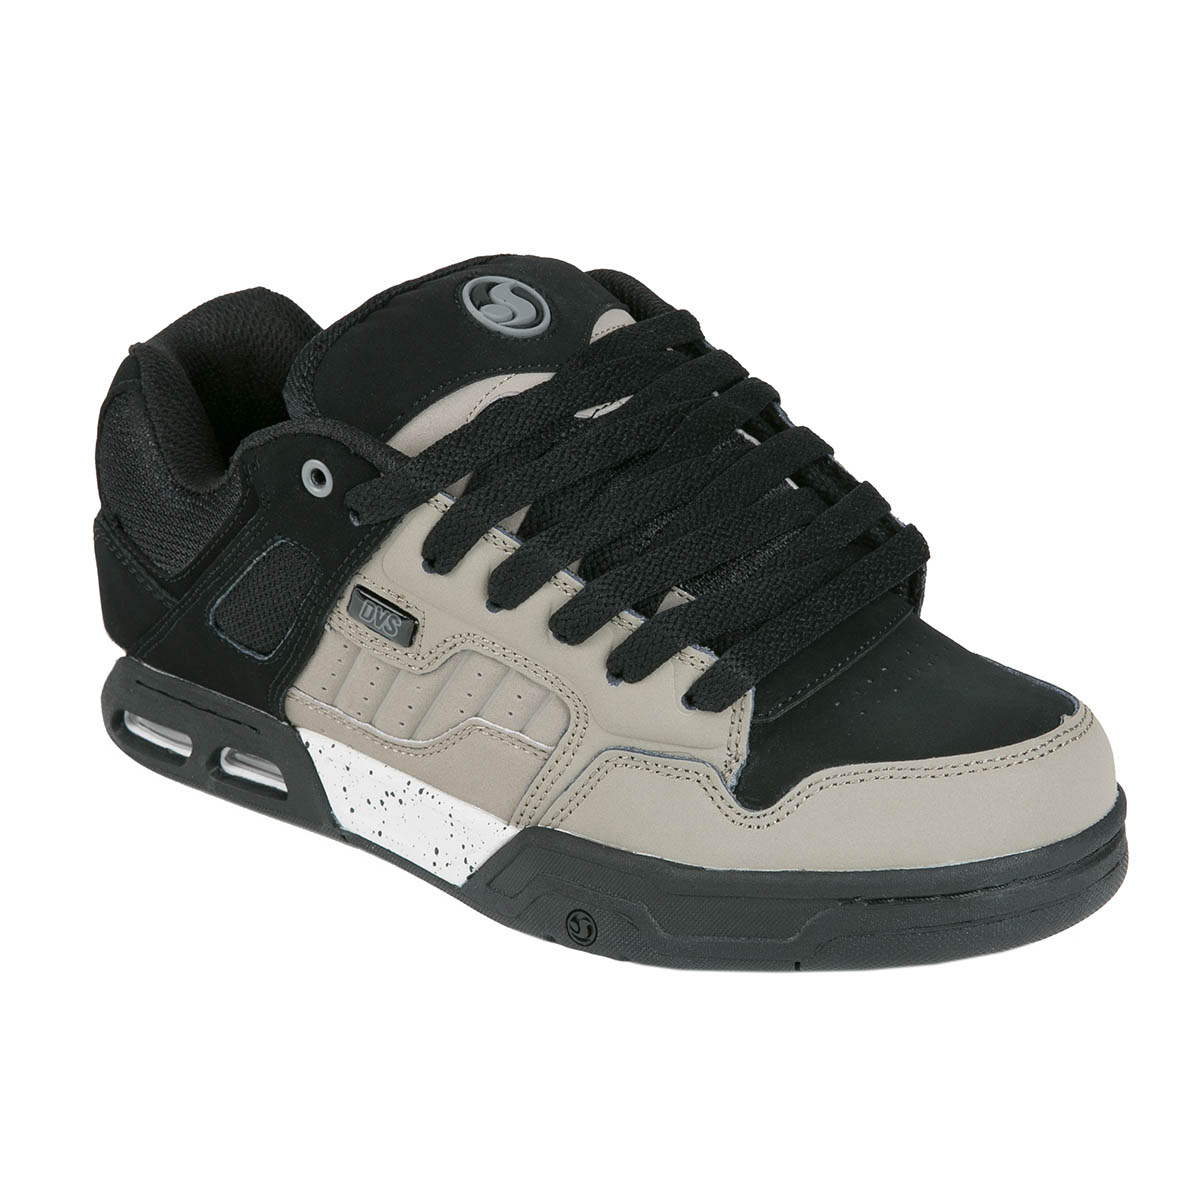 DVS Shoes Enduro Heir Taupe Black Leather